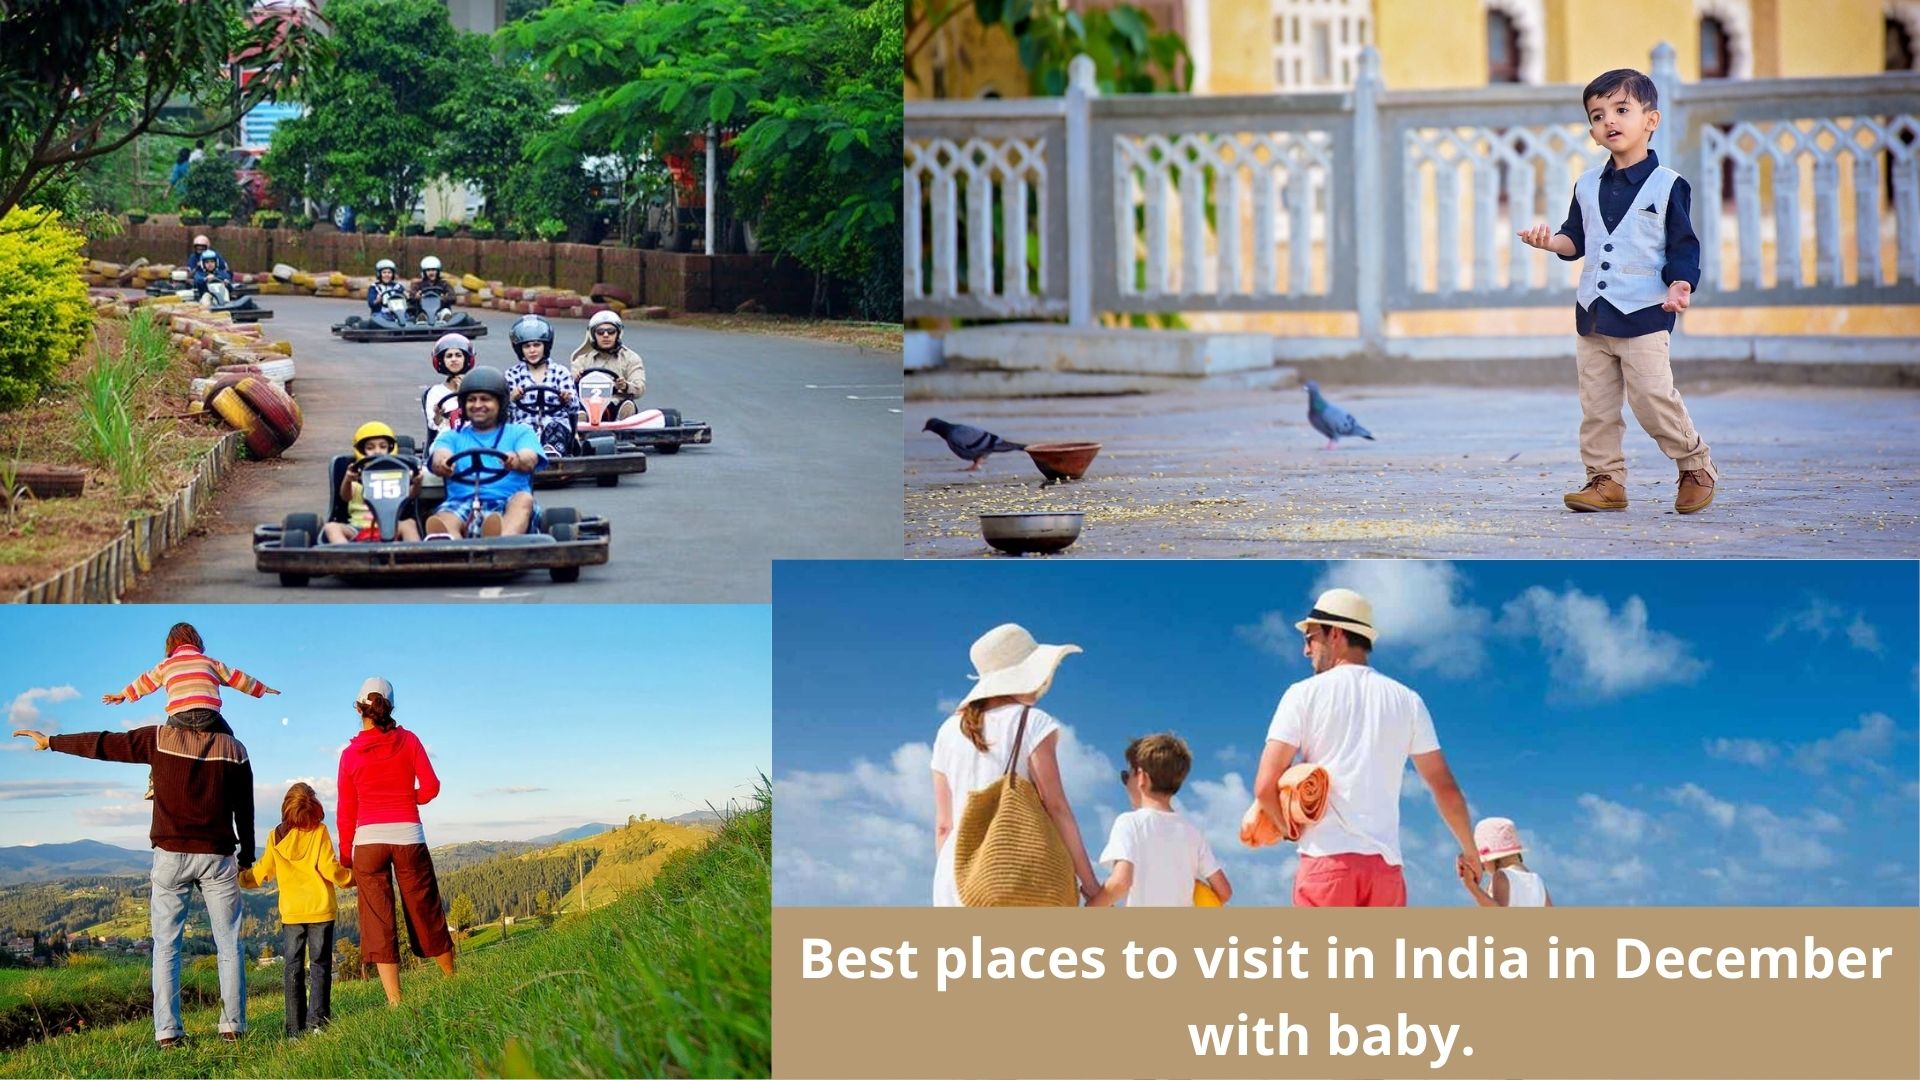 public/uploads/2021/12/Best-places-to-visit-in-India-in-December-with-baby..jpg